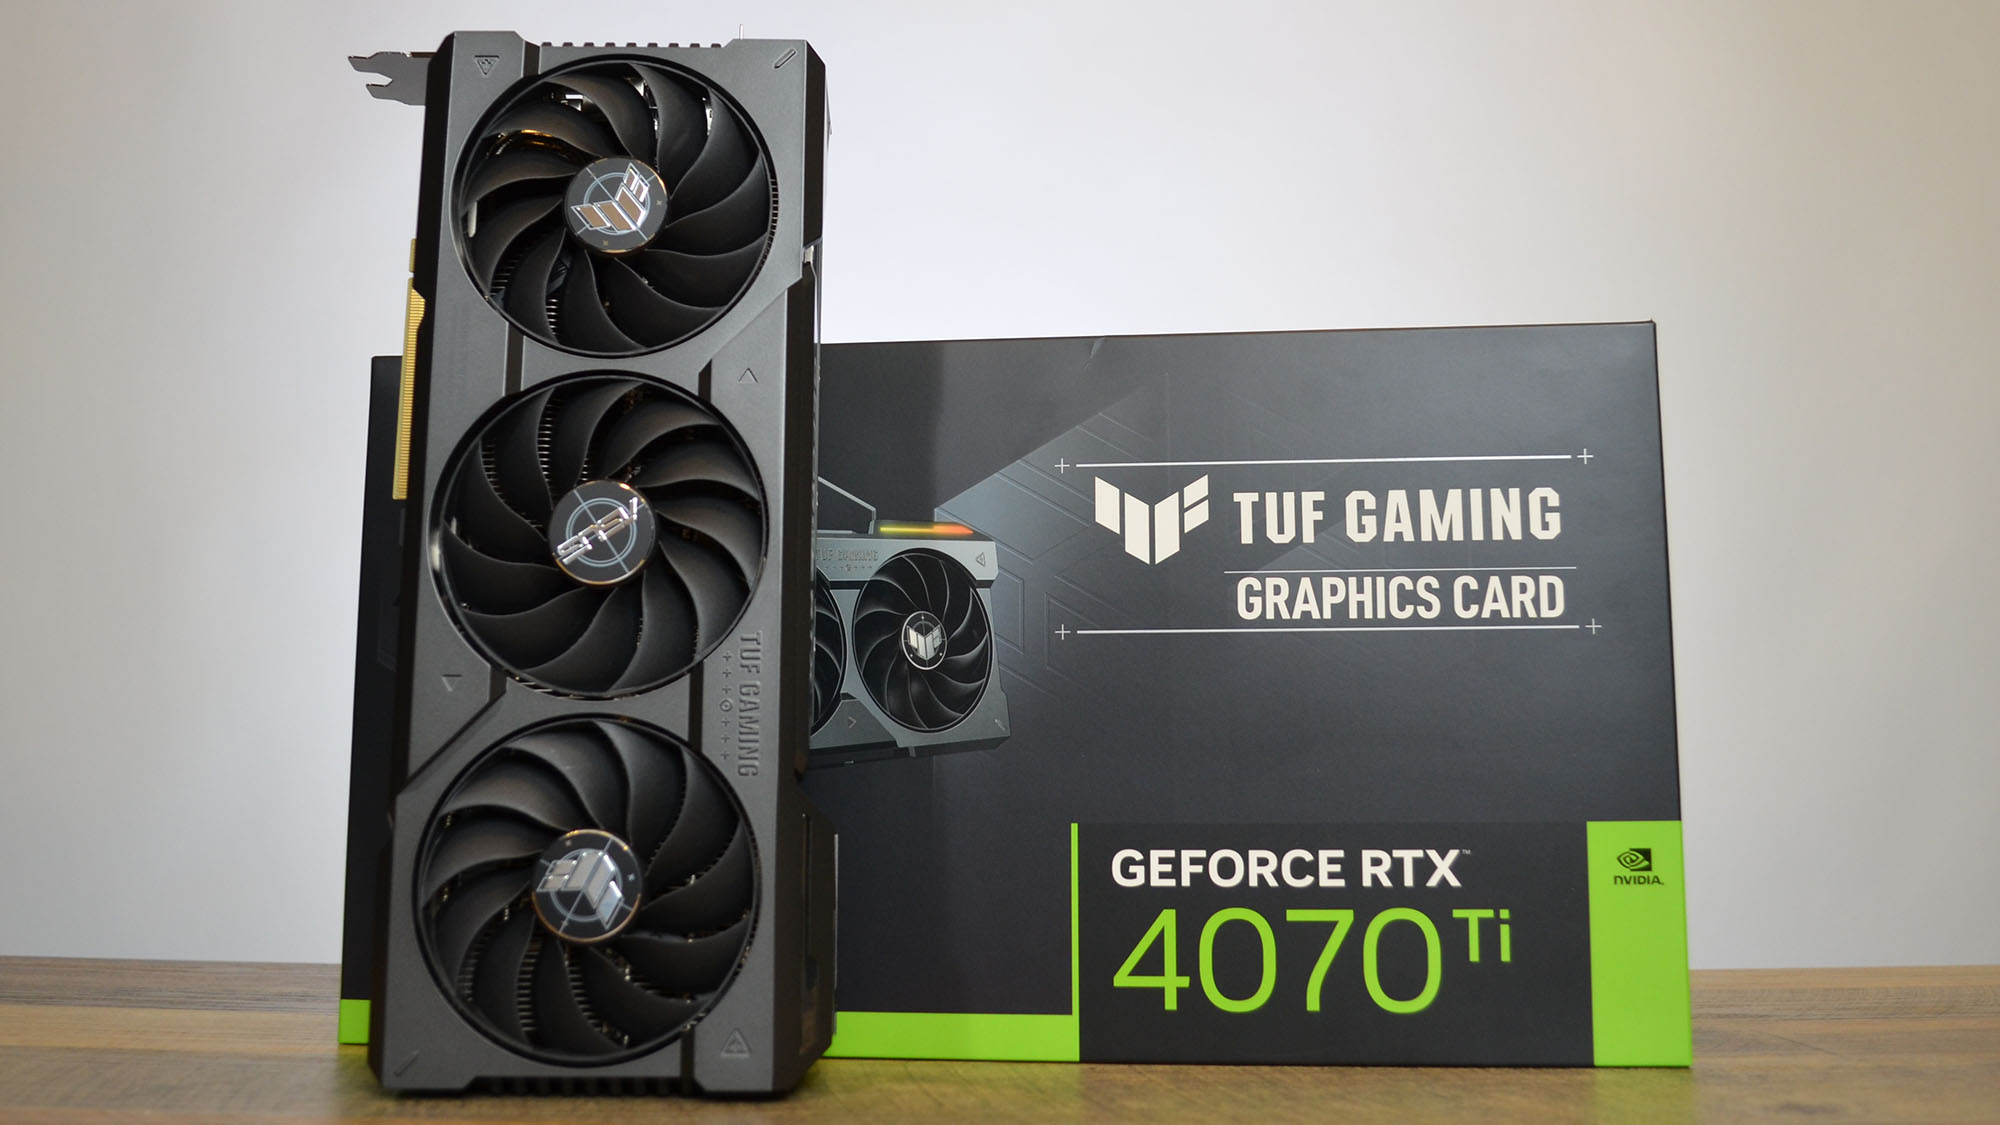 An Nvidia GeForce RTX 4070 Ti graphics card on a wooden table with its retail packaging